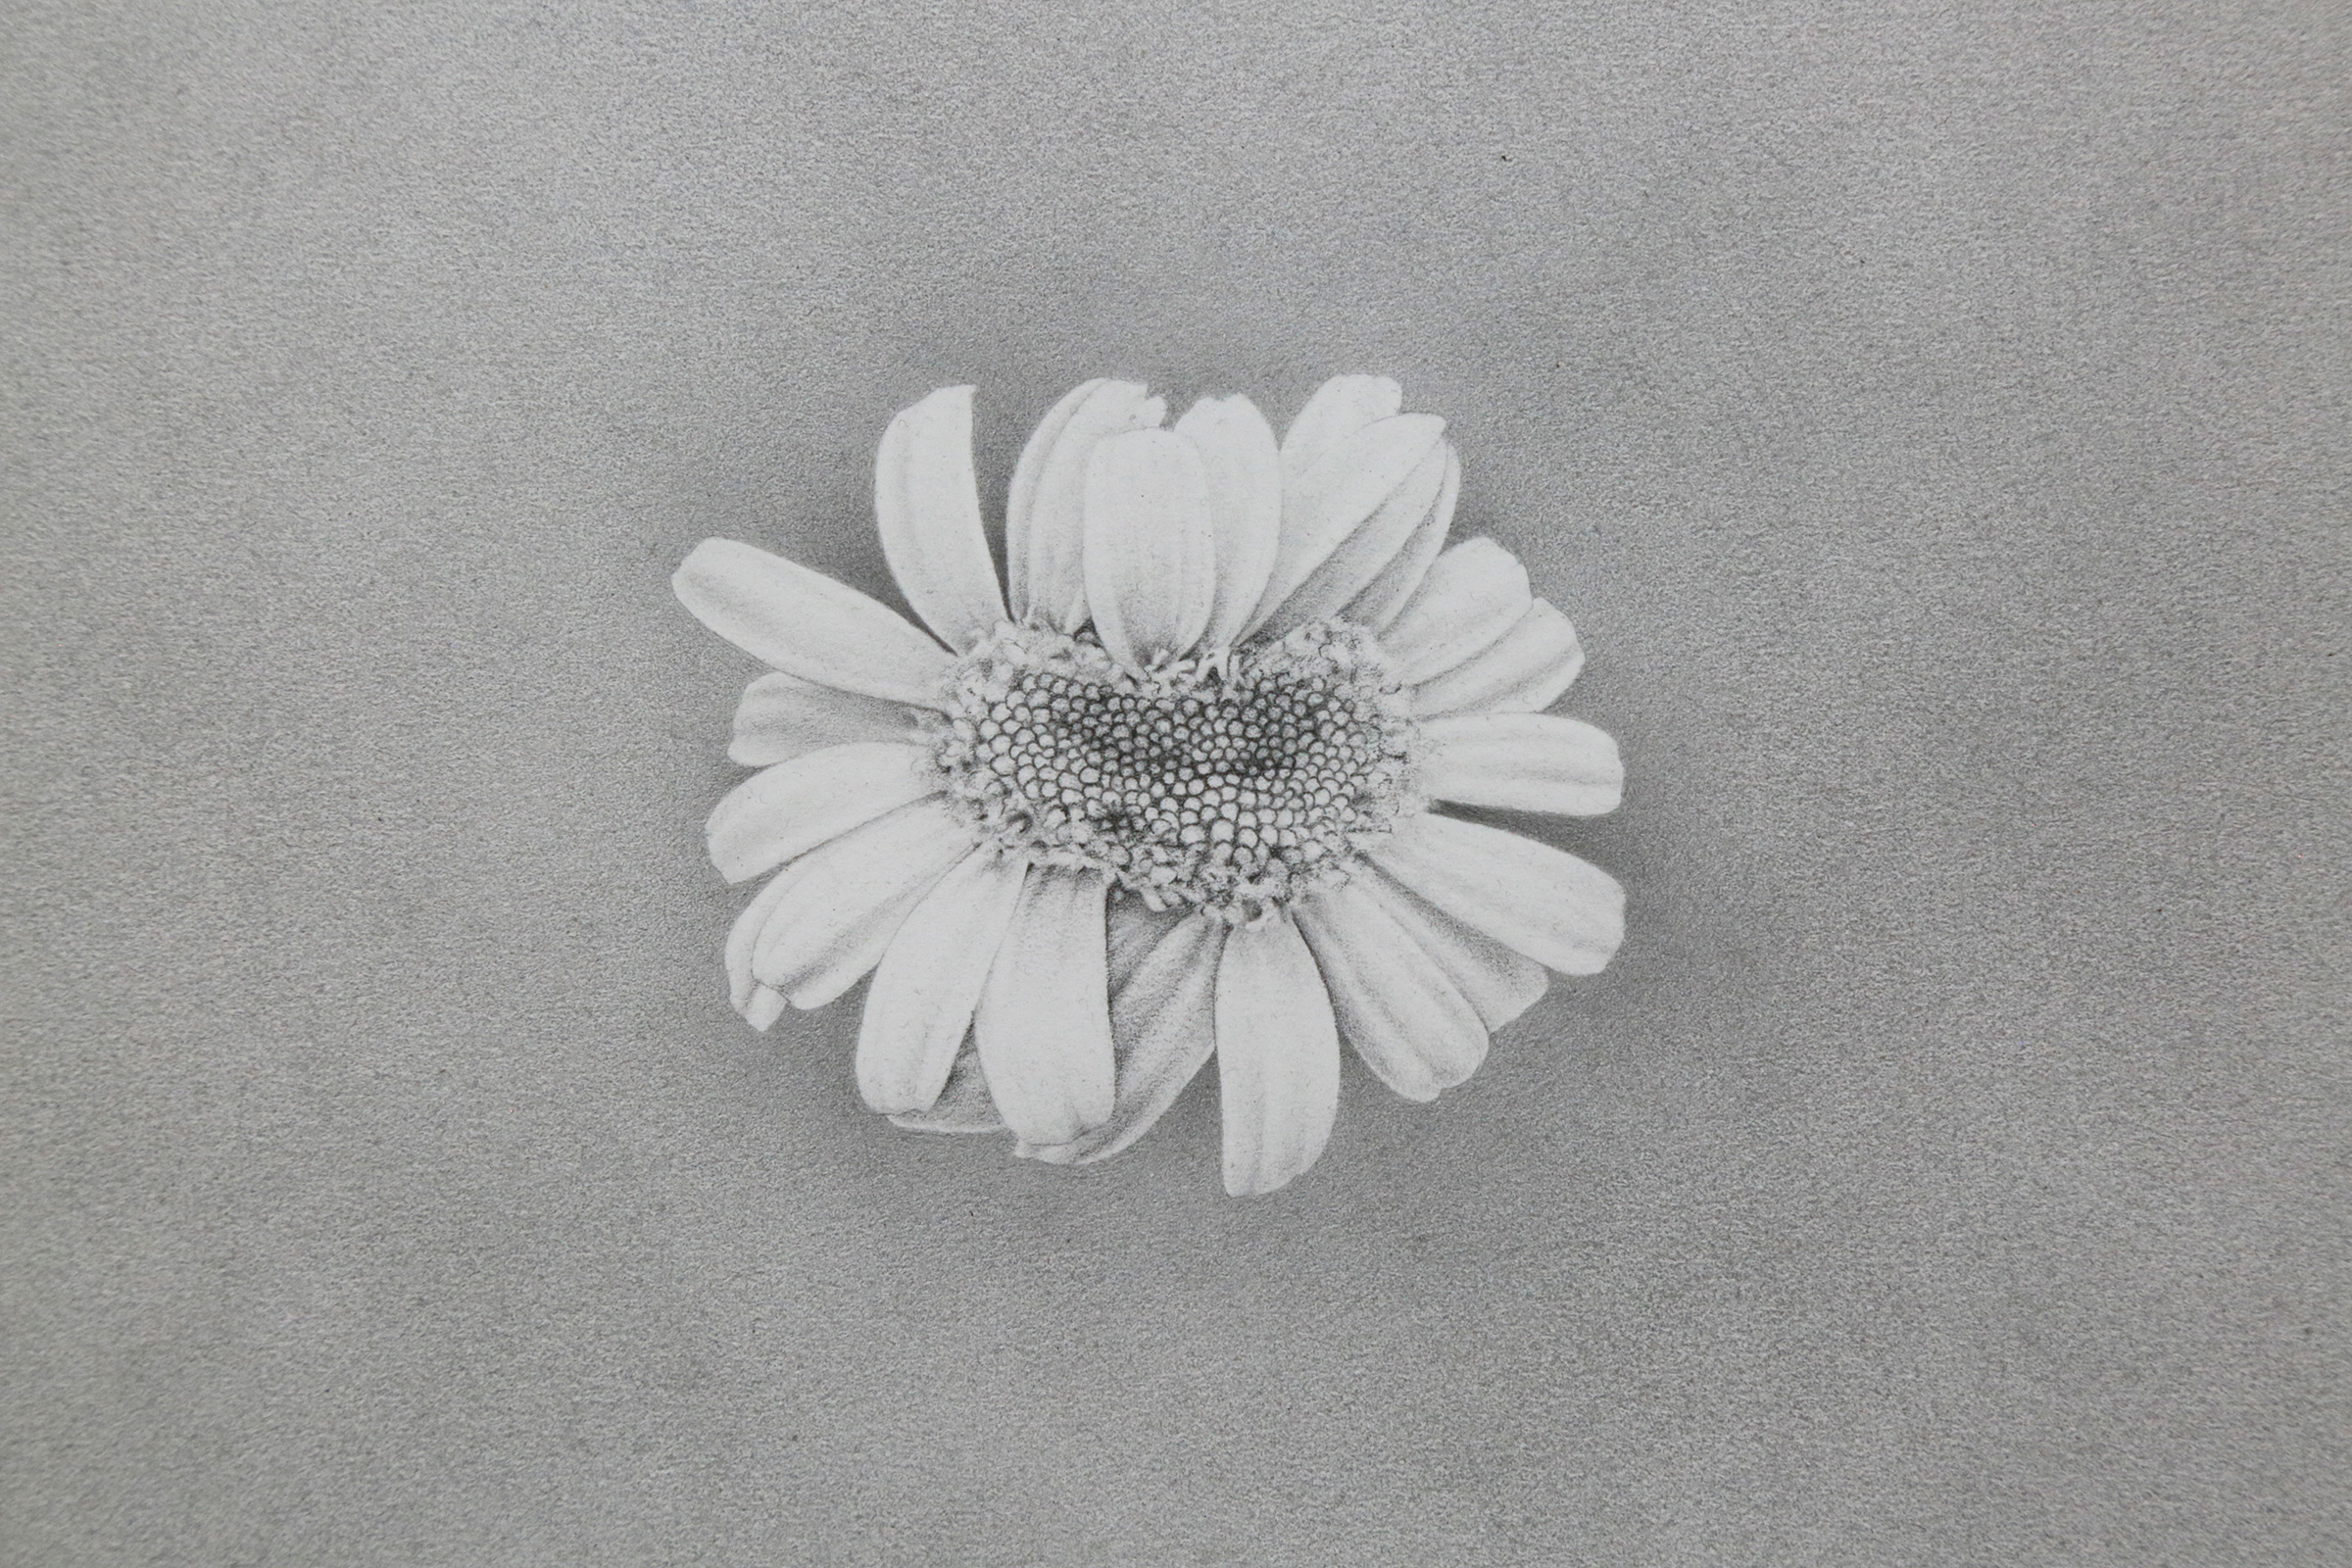 This is a graphite drawing of an even more obviously mutated daisy flower, and the center of the blossom is stretched wider still. The blossom is centered in the middle of the drawing, surrounded by a matte, gray background also drawn in graphite.